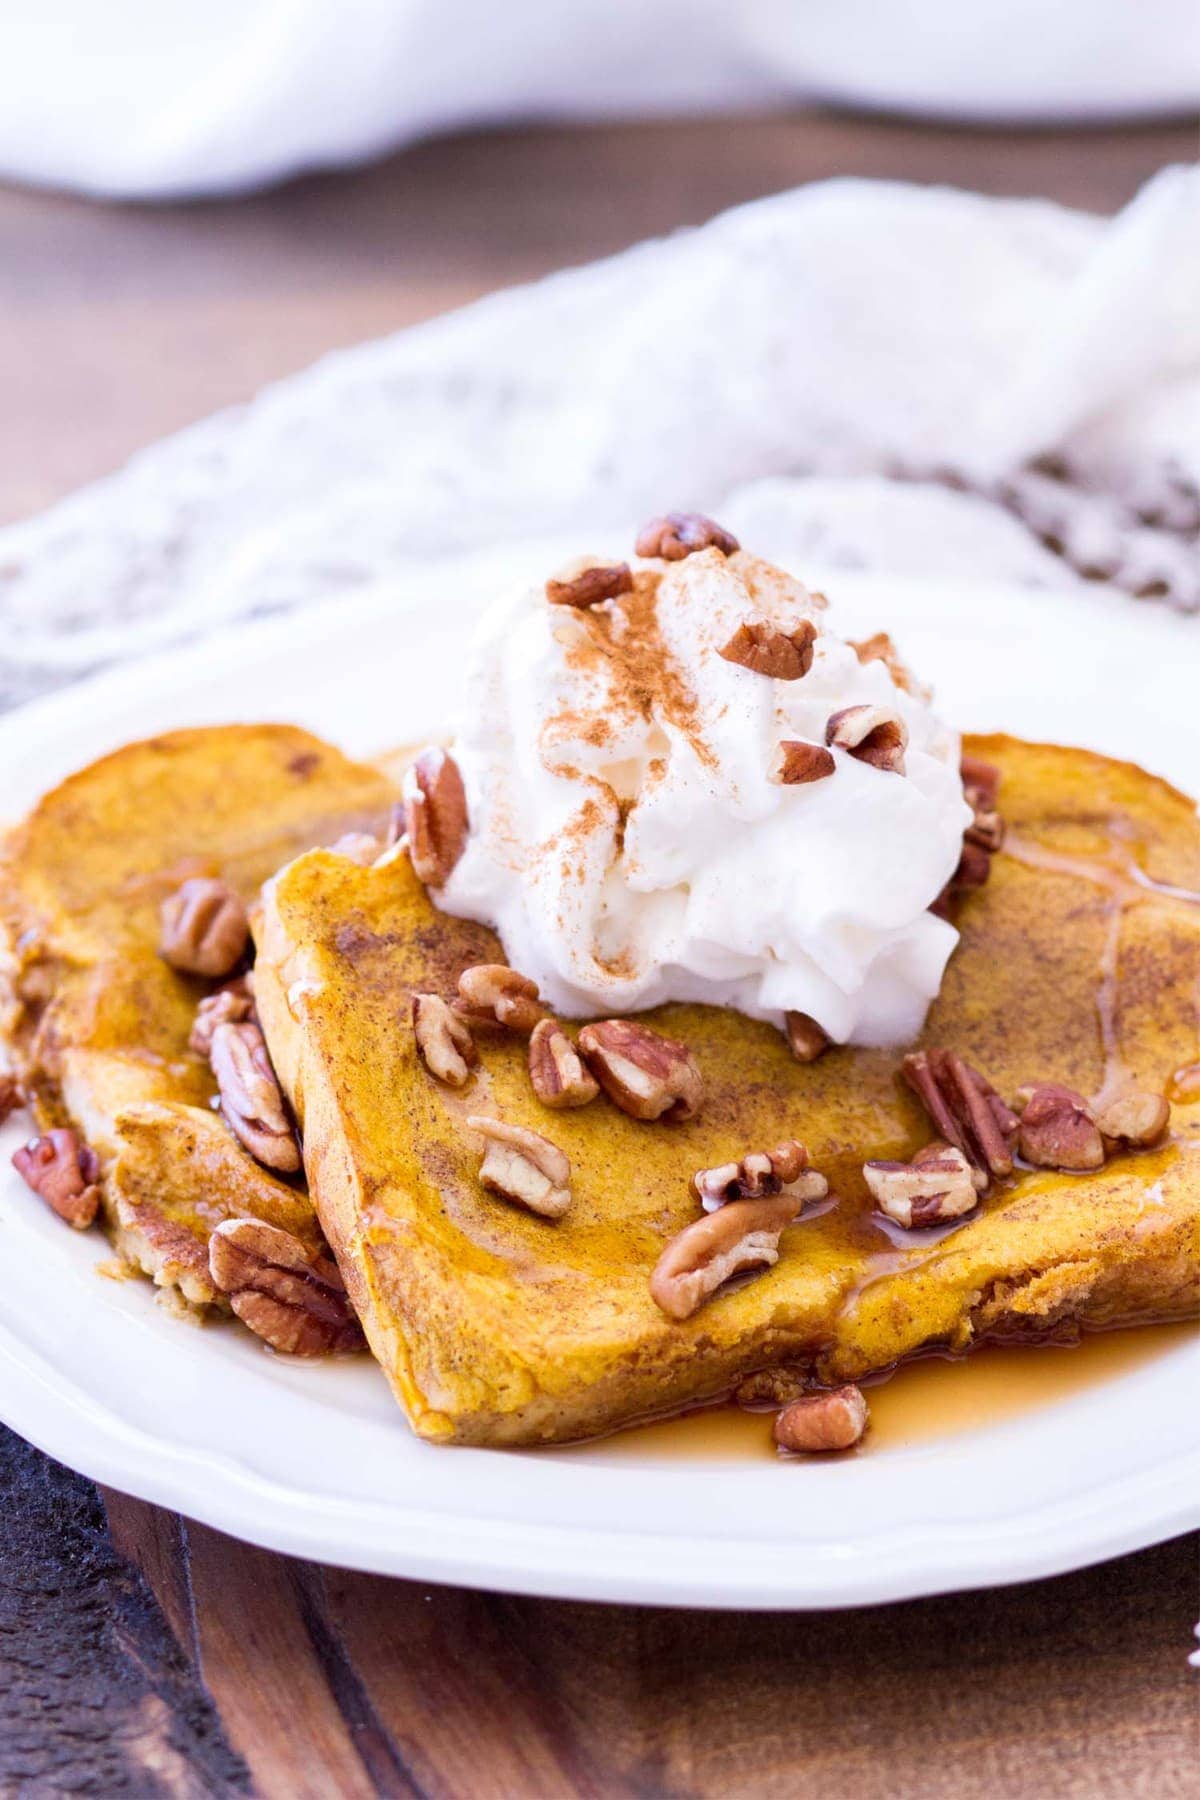 This easy pumpkin french toast recipe is baked in the oven, making this the perfect fall breakfast for any day of the week! Thick-cut bread is soaked in a rich pumpkin custard and baked to perfection! 